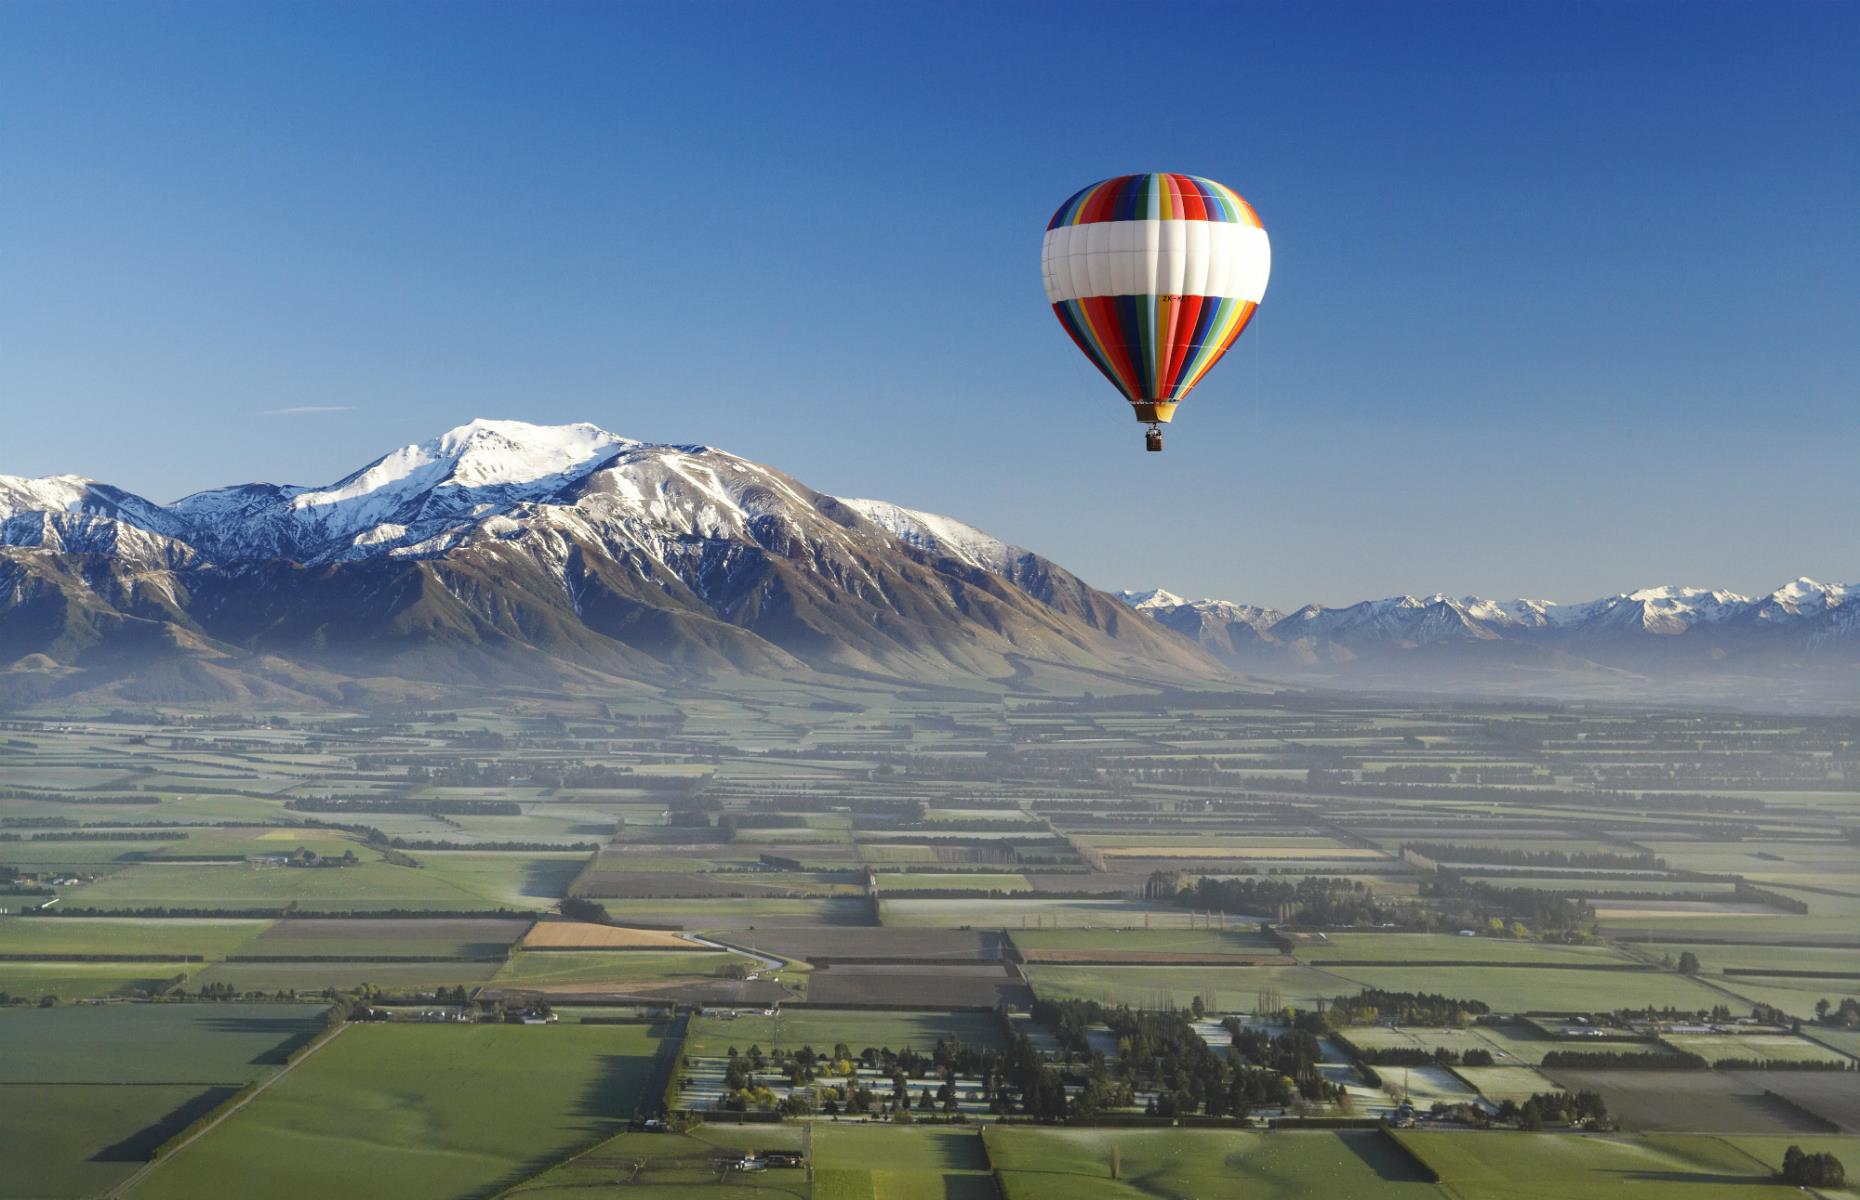 <p>Floating over the panoramic Canterbury Plains landscape is a never-to-be-forgotten experience. Hot air ballooning here is at its most magical and peaceful at sunrise. Ballooning Canterbury offers hour-long flights and balloon fiestas where you have the opportunity to float among other balloons.</p>  <p><strong><a href="https://www.loveexploring.com/galleries/81915/the-worlds-most-incredible-hot-air-balloon-rides?page=1">The world's most incredible hot-air balloon rides</a></strong></p>